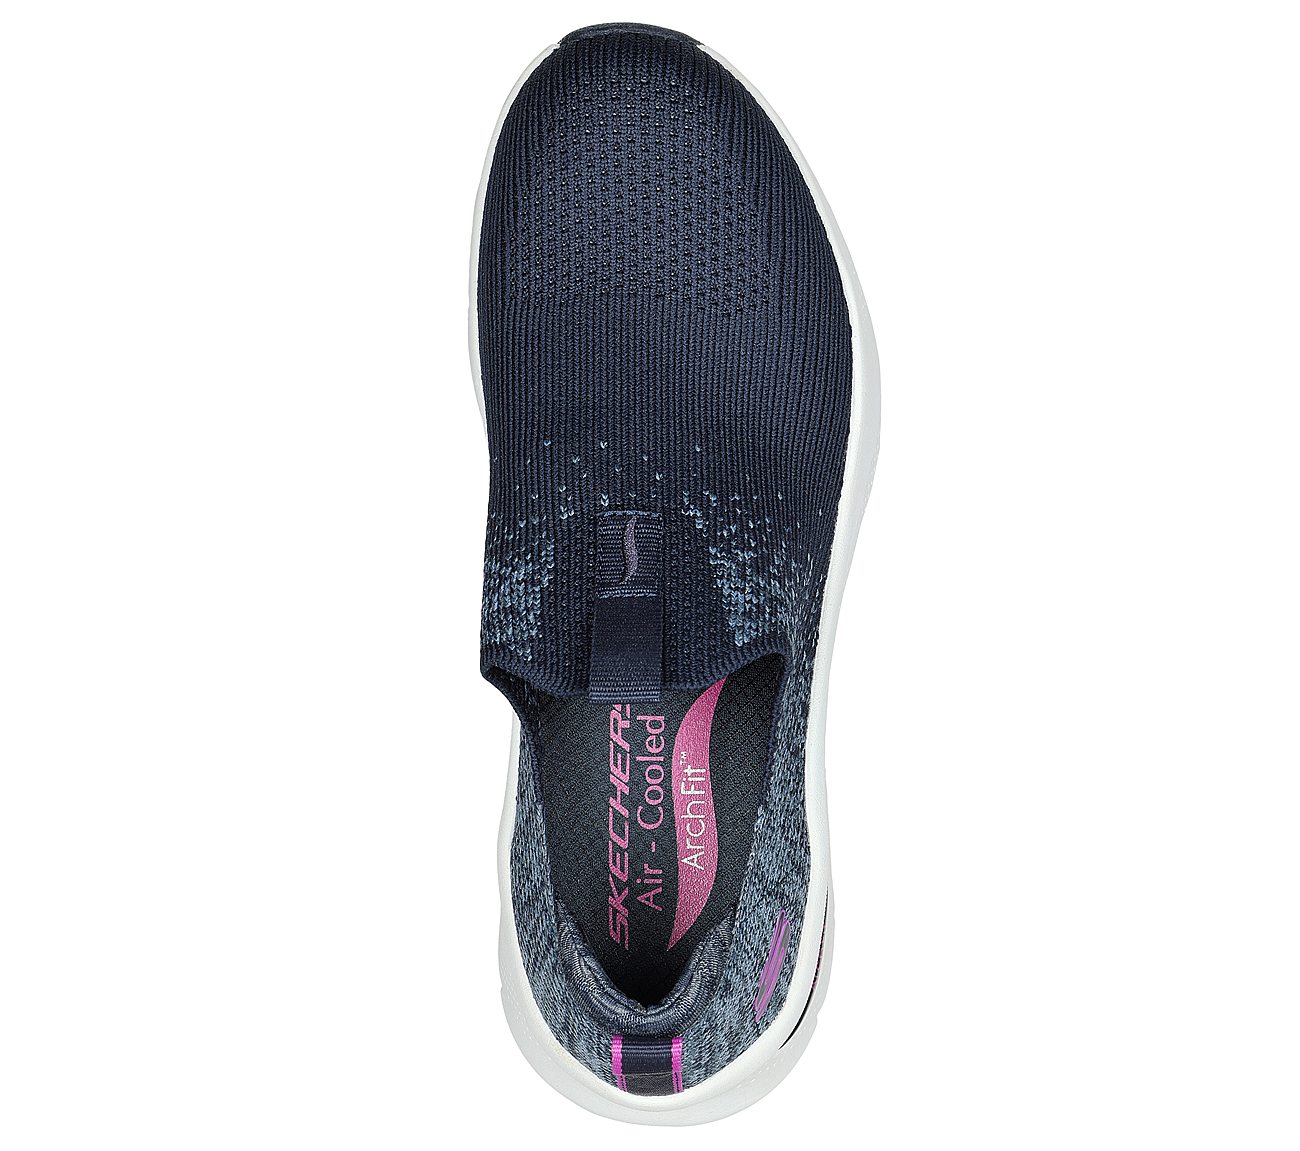 ARCH FIT D'LUX-JOURNEY, NNNAVY Footwear Top View